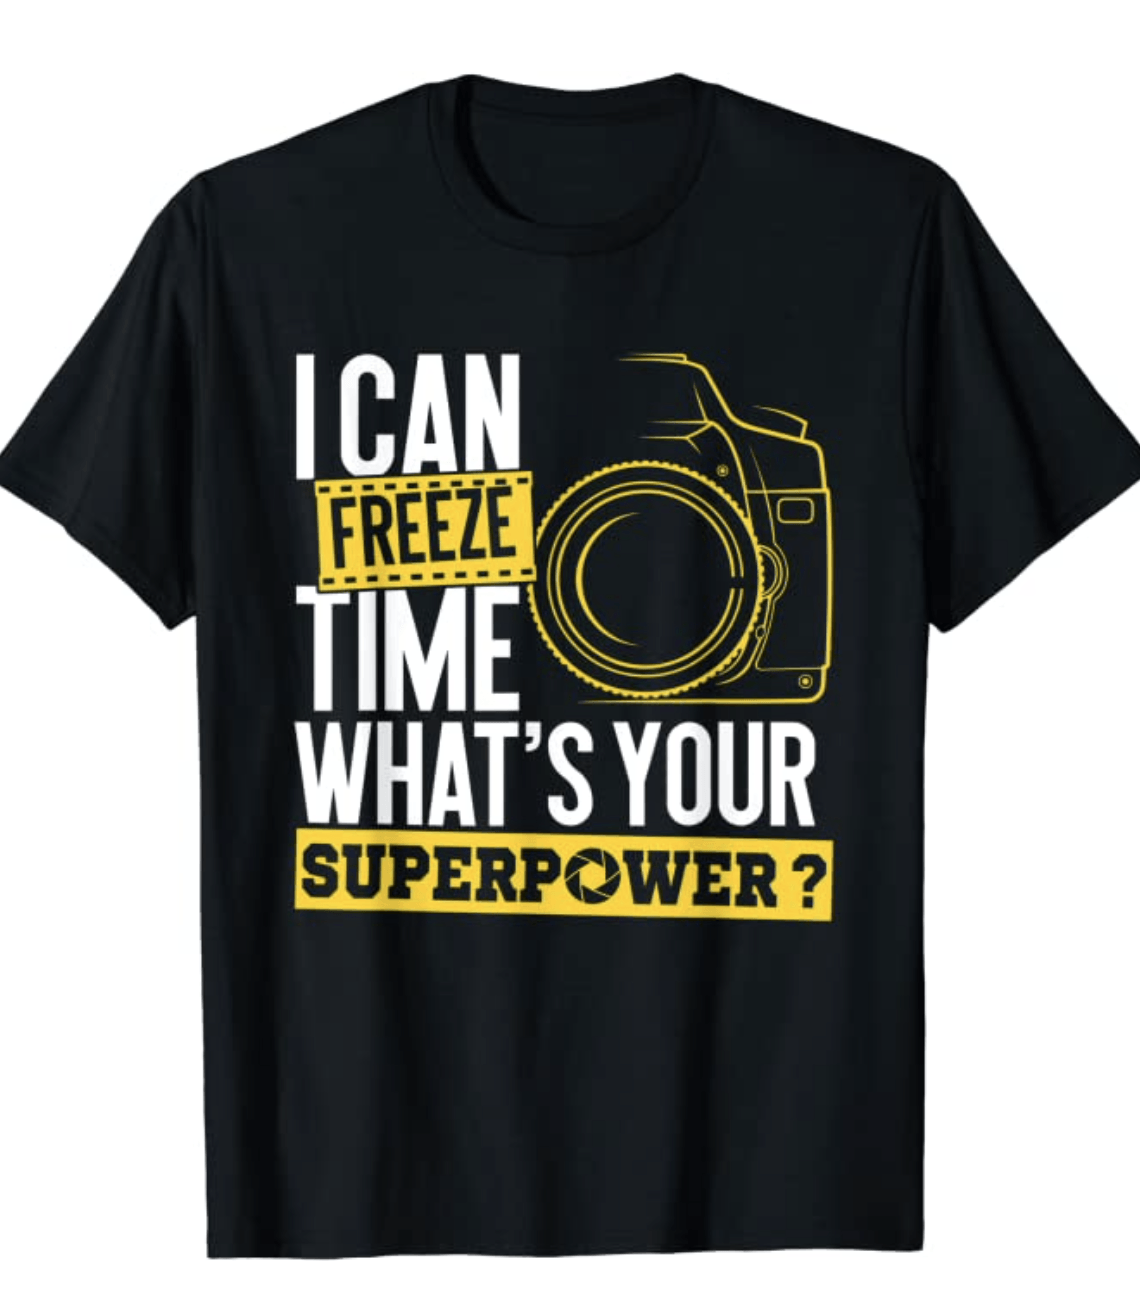 Photography t-shirts design of freezing time superpower 